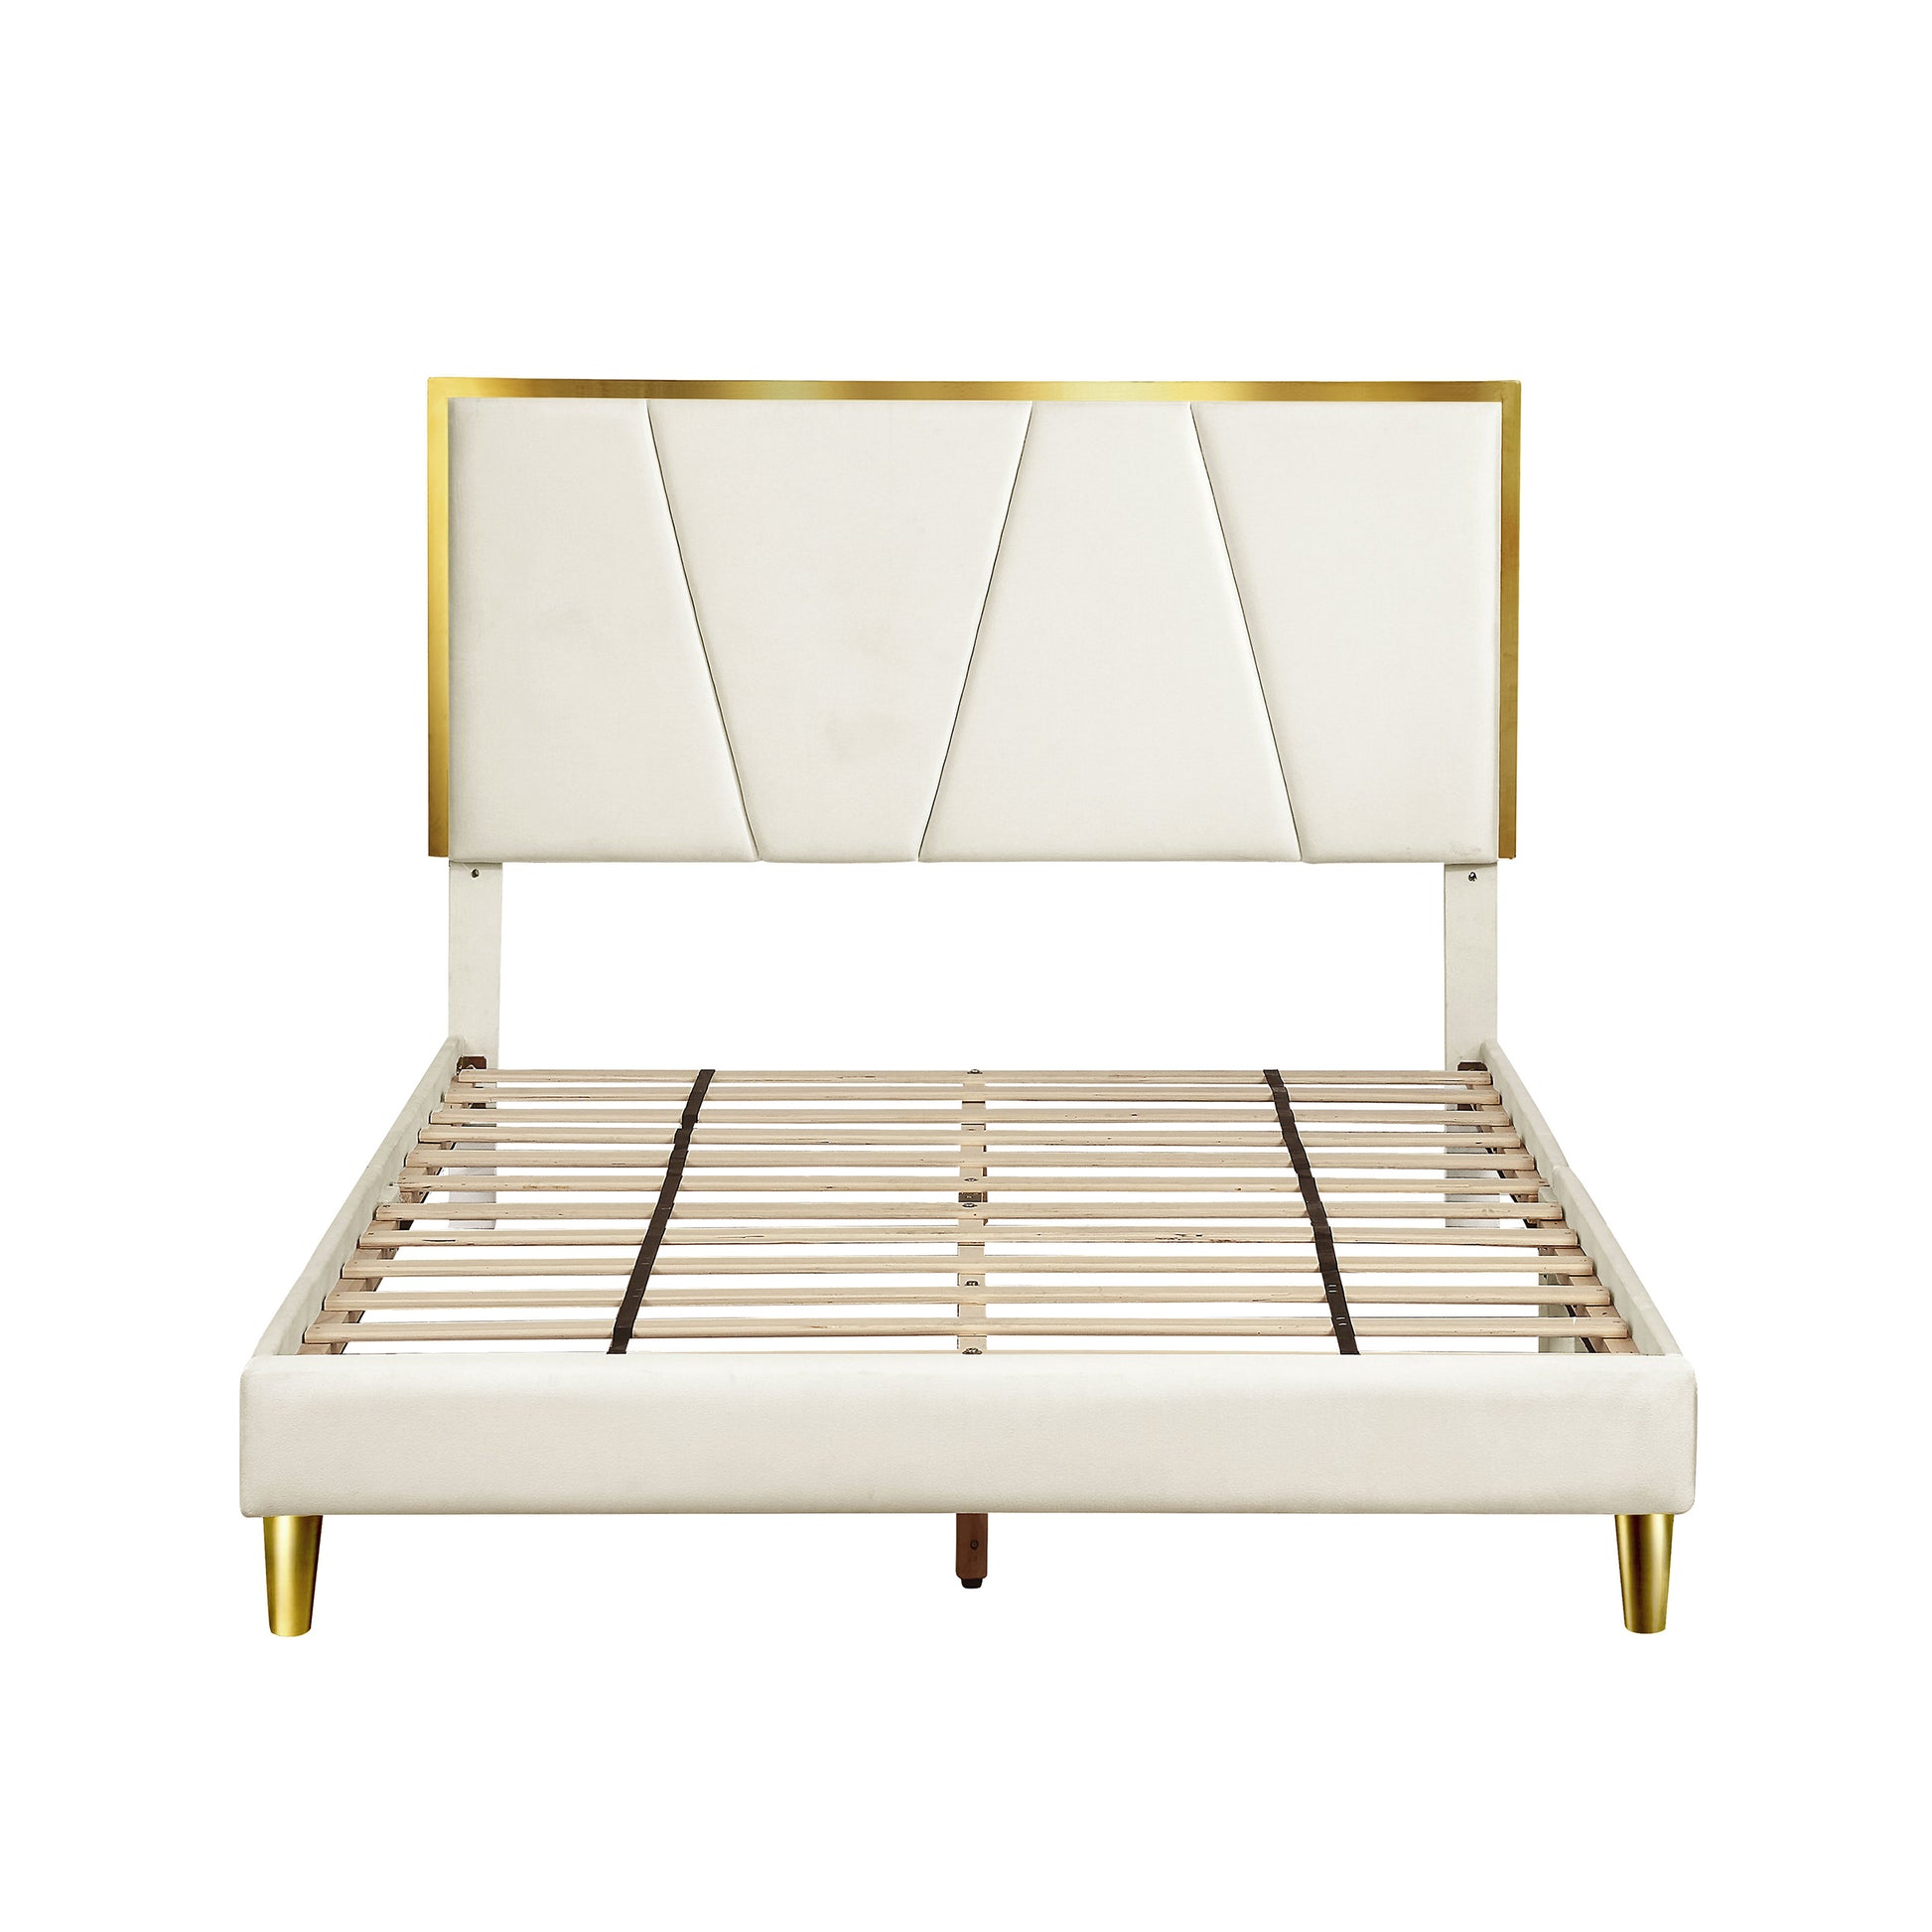 Front-facing contemporary beige and gold upholstered queen bed with slats shown on a white background